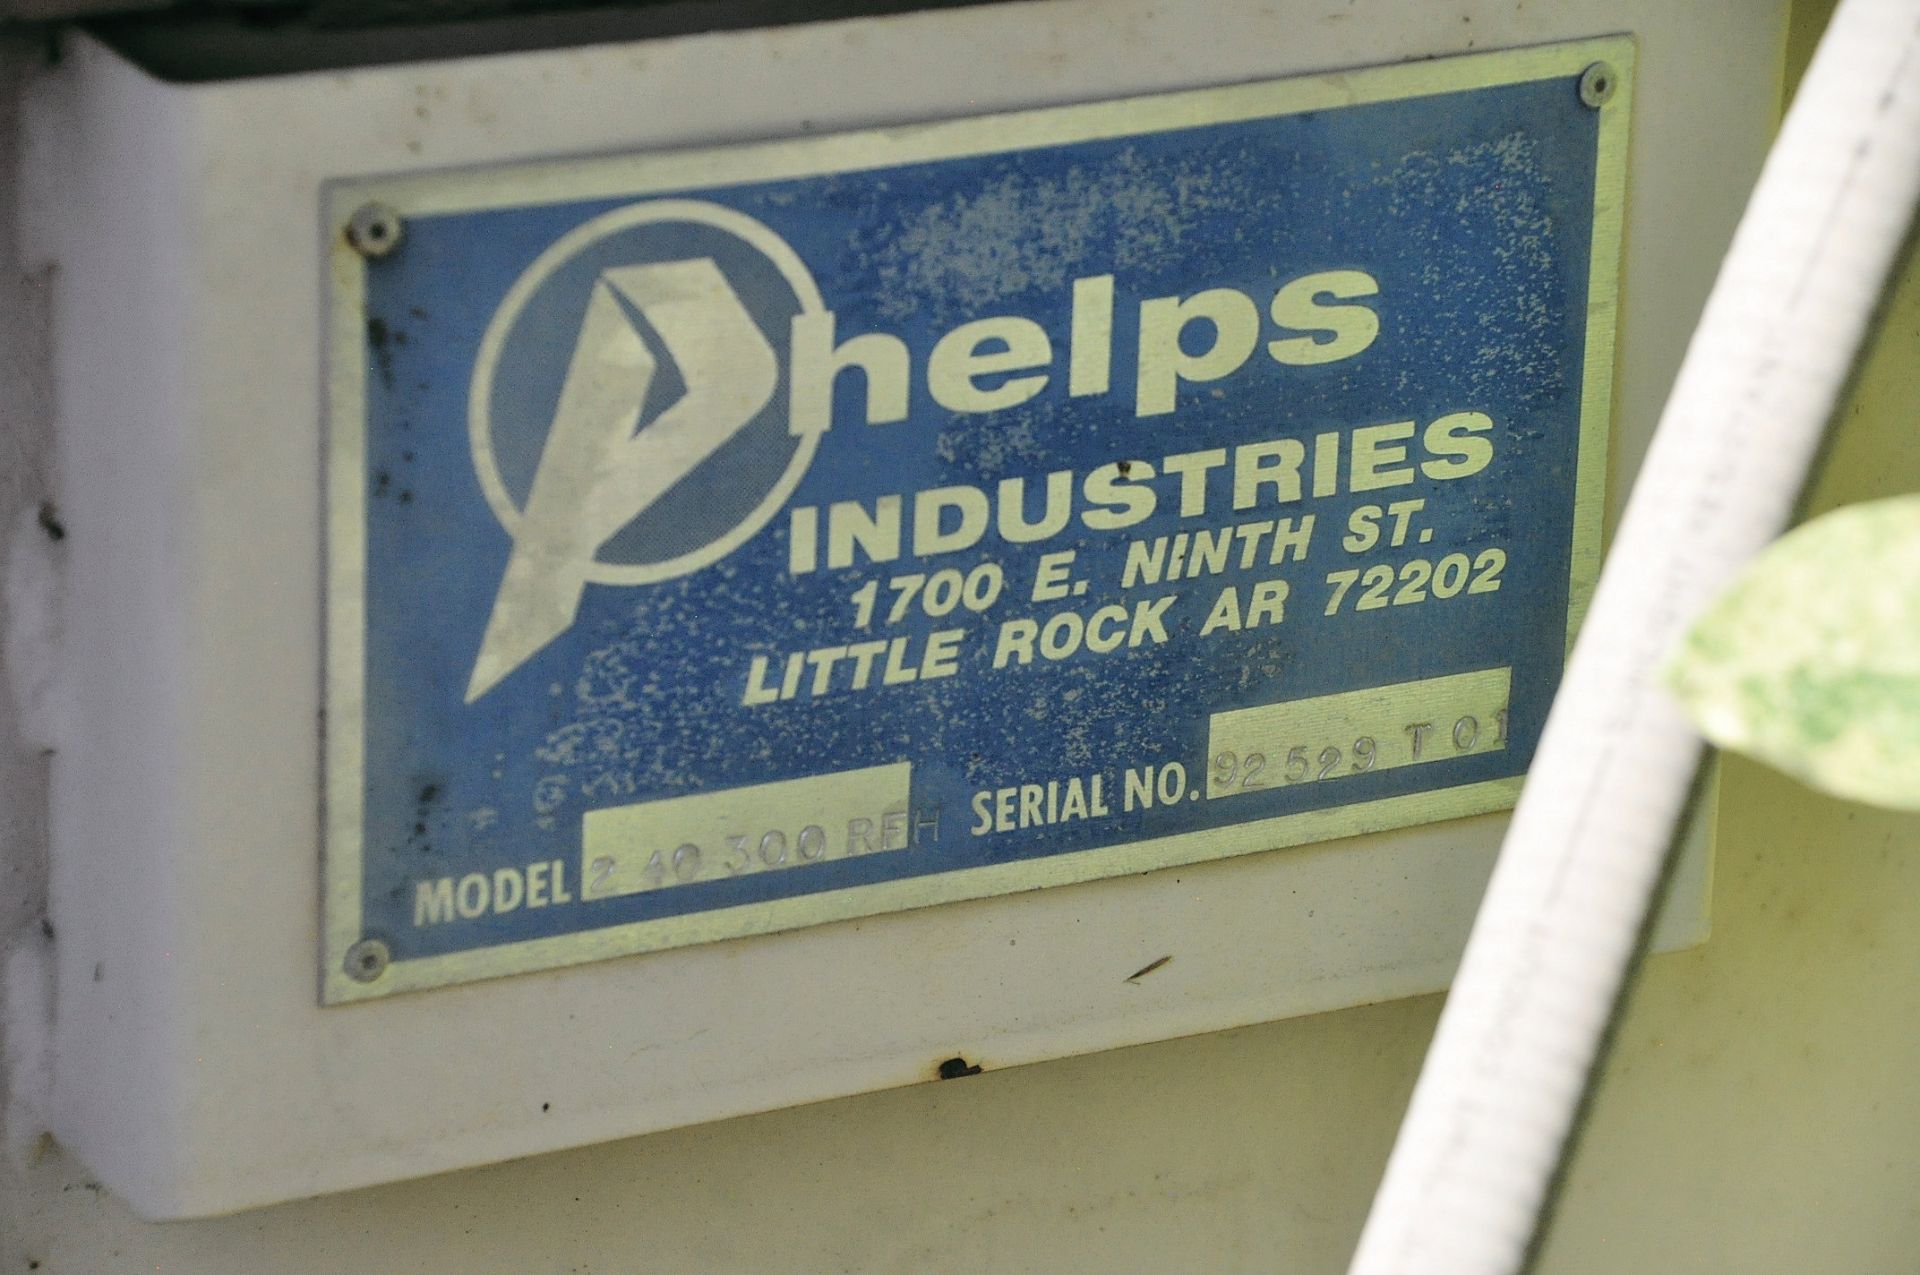 Phelps Hydraulic Truck Tipper, 9' x 70' Vehicle Tipping/Elevating Platform, - Image 11 of 19